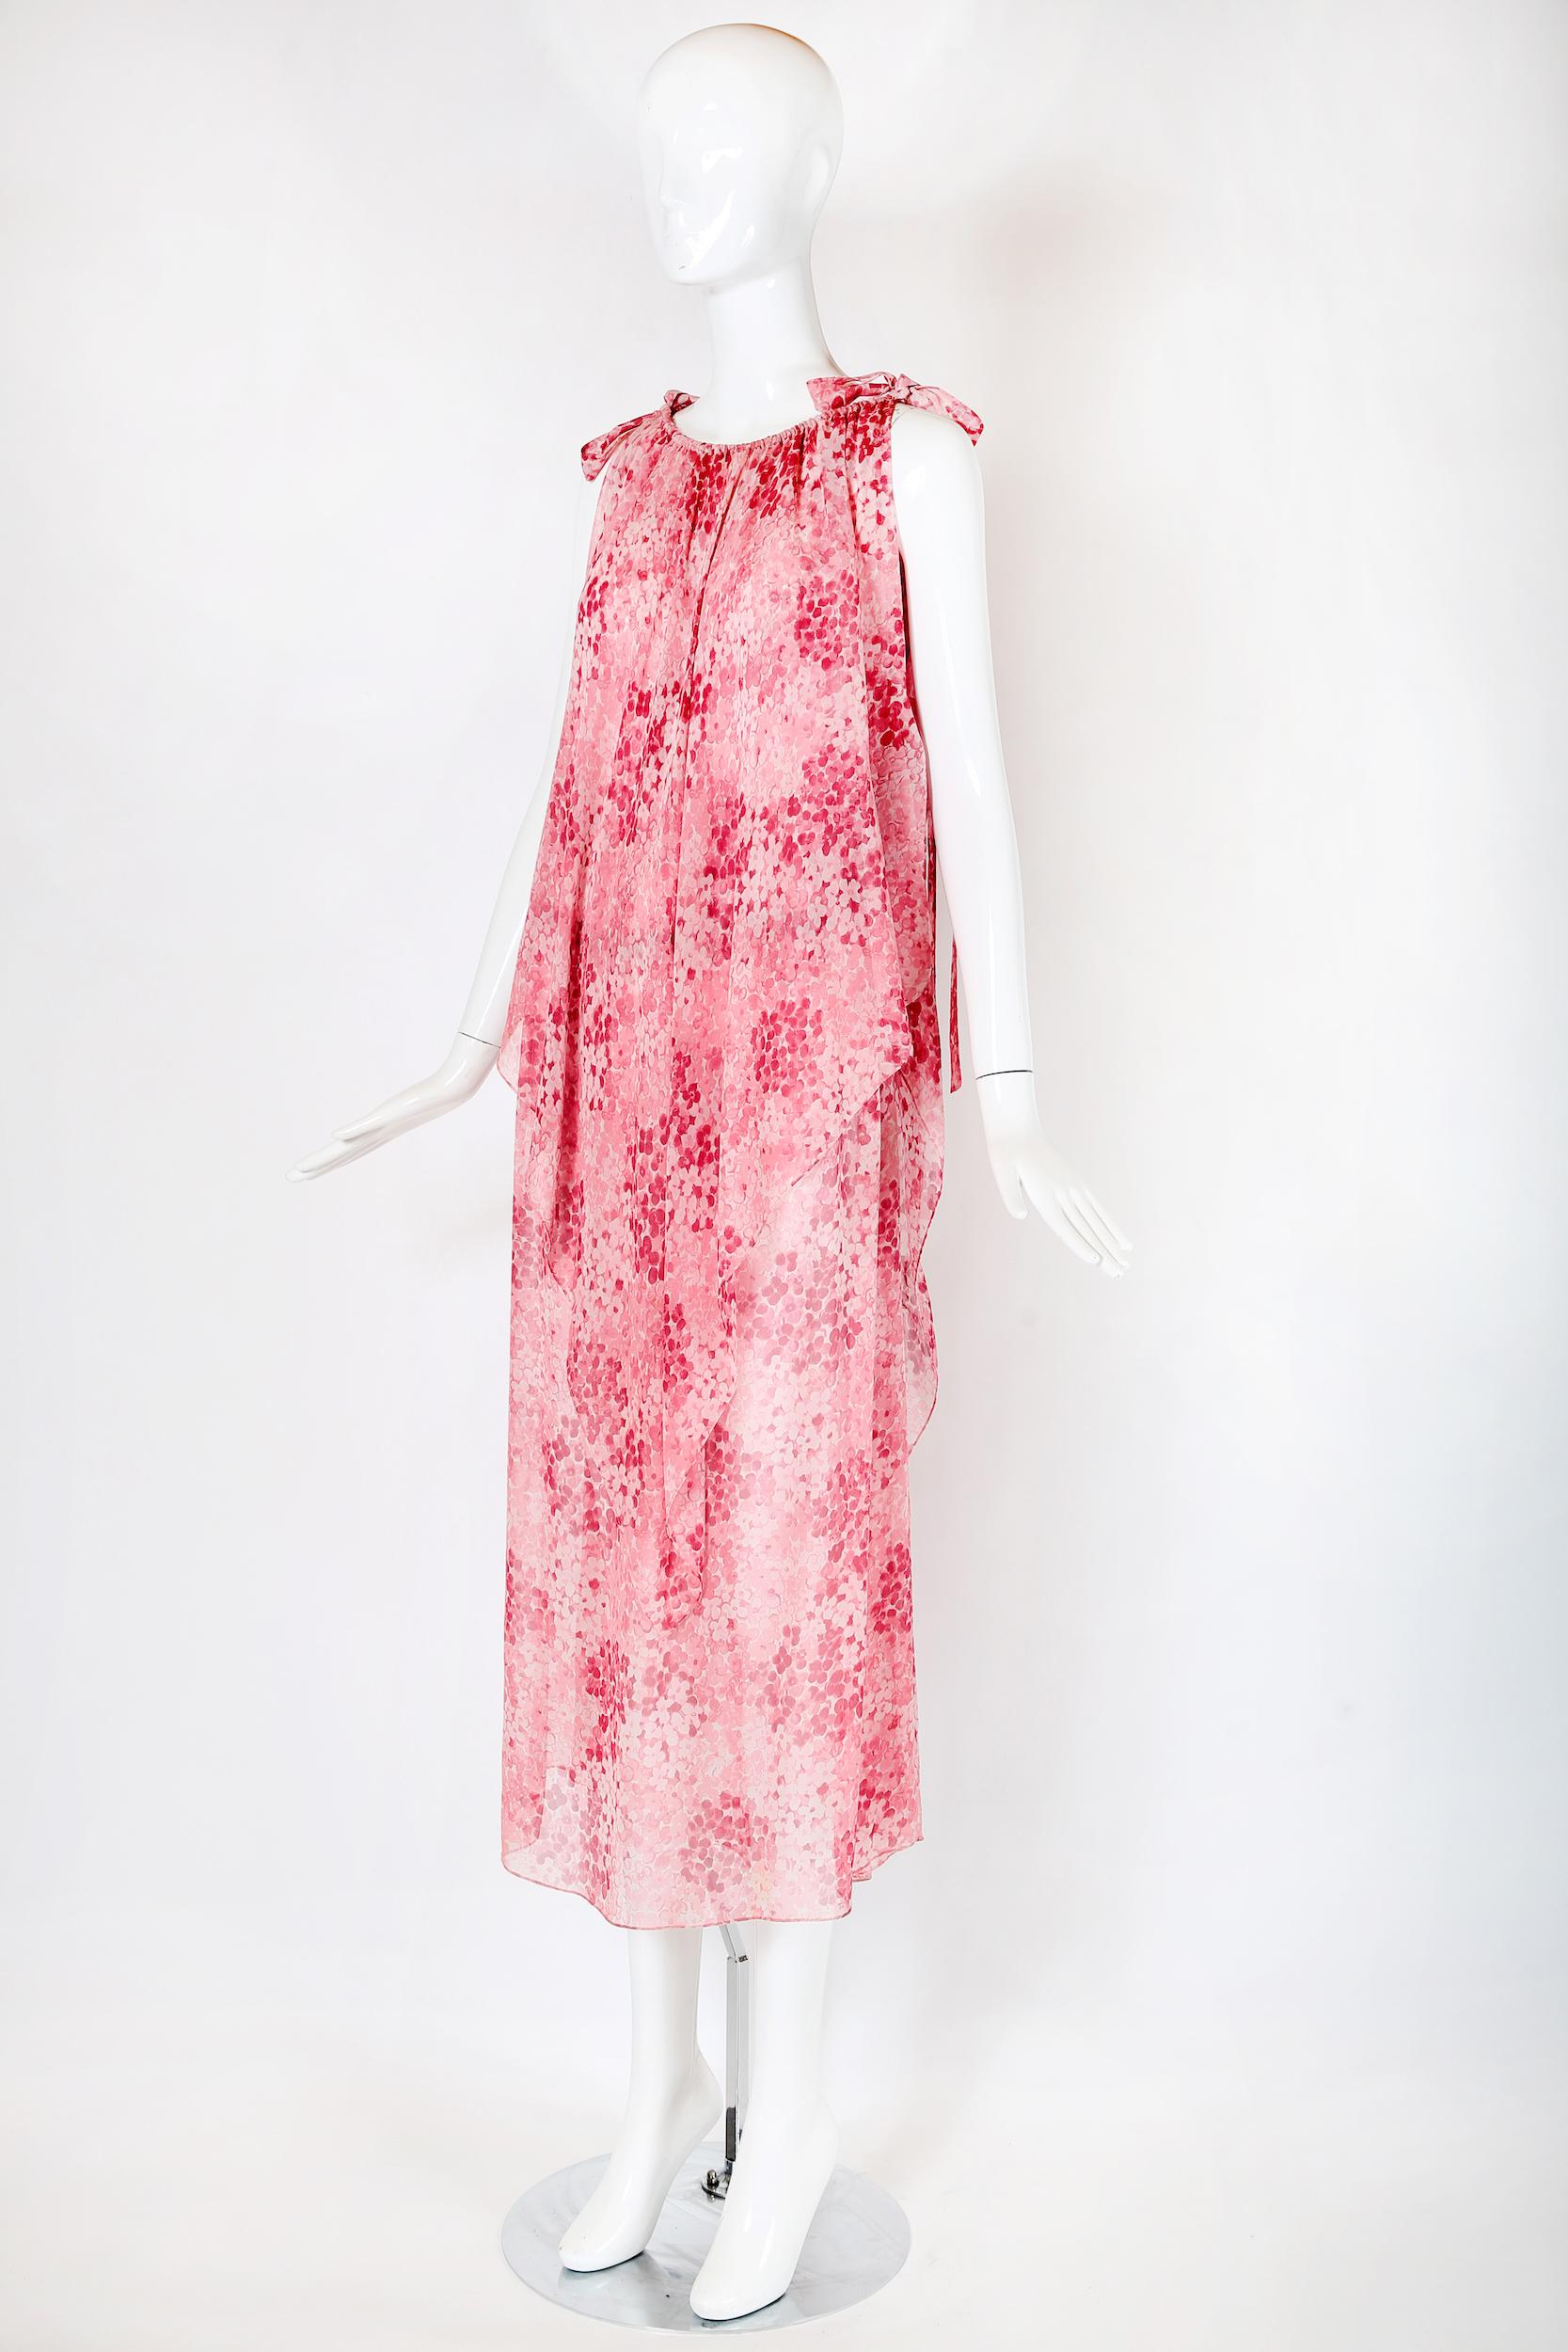 Vintage Yves Saint Laurent pink floral printed chiffon double-layered sleeveless tunic-style dress with an elastic waistband at the interior tunic dress, a gathered elastic neckline, a slit up the left side and extra long fabric ties at each